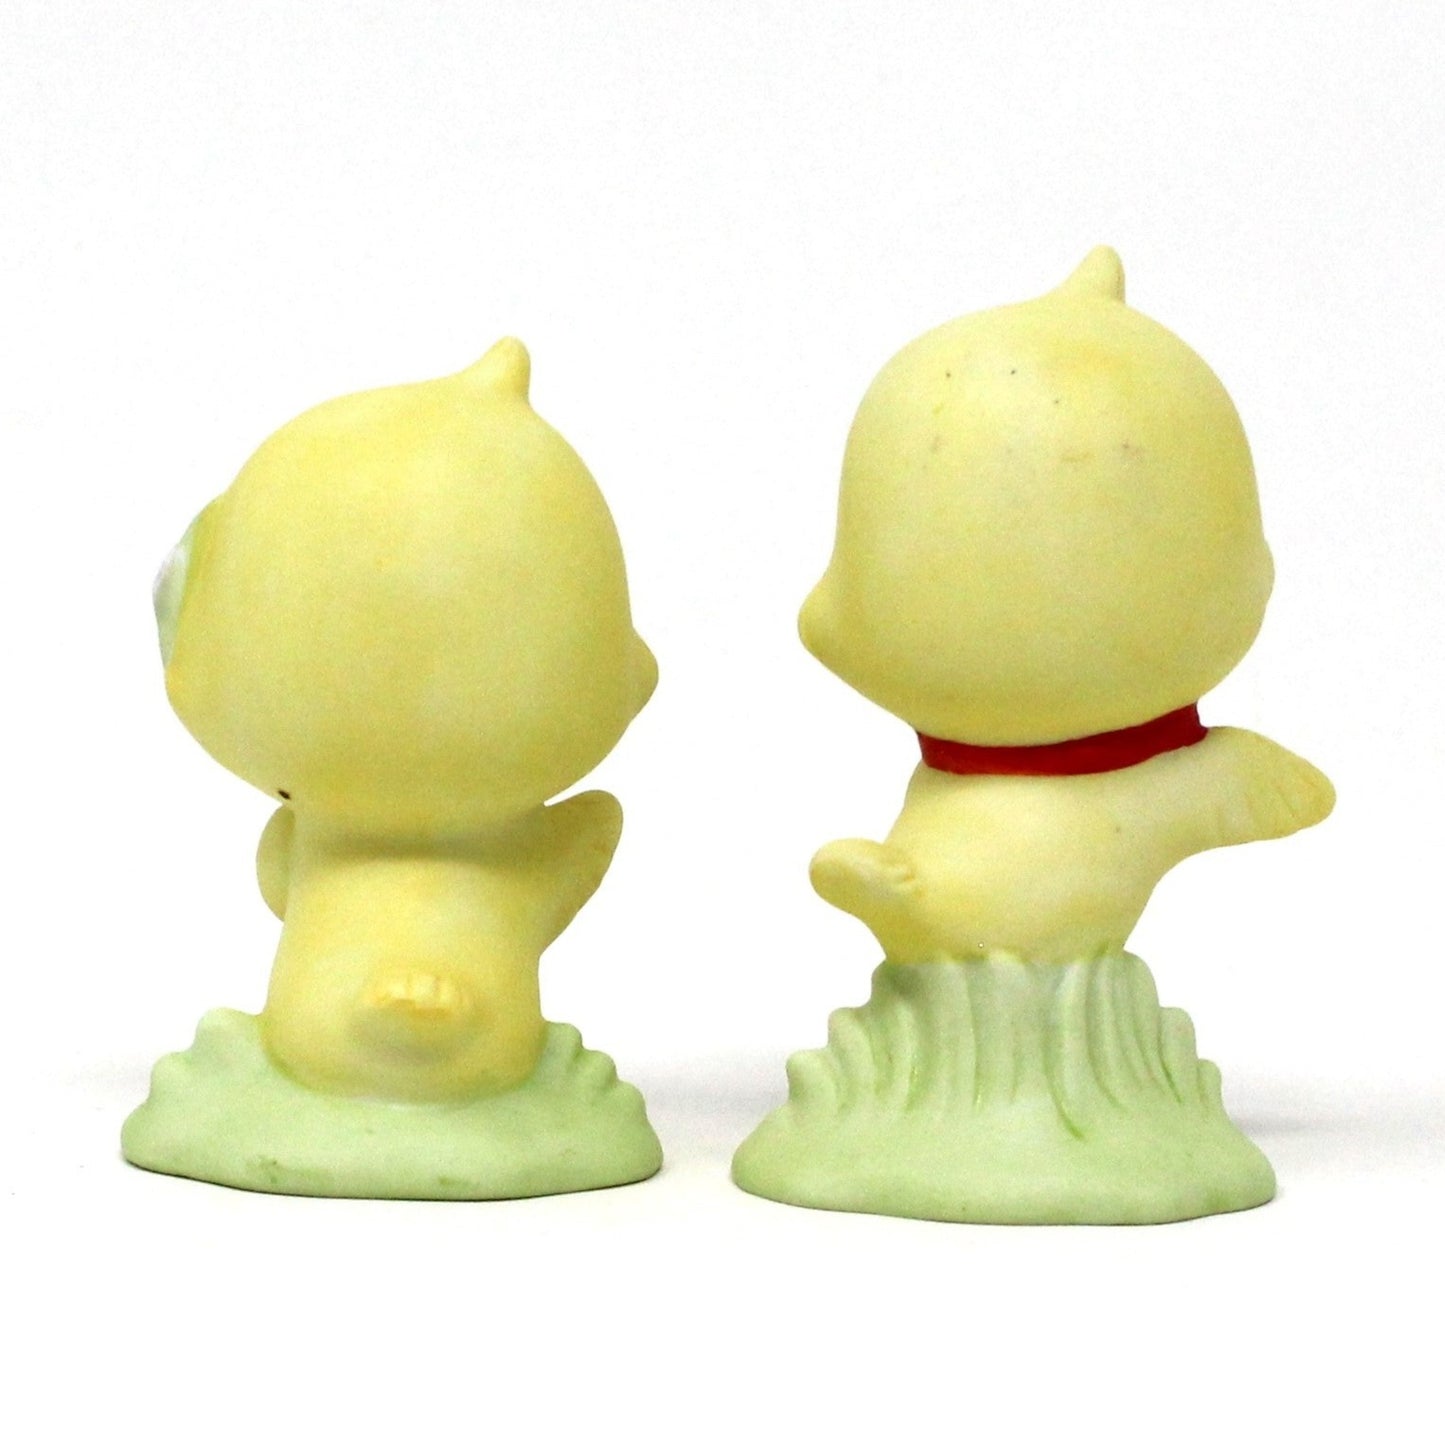 Figurine, Yellow Baby Chicks, Anthropomorphic, Set of 2 Porcelain, Vintage, SOLD